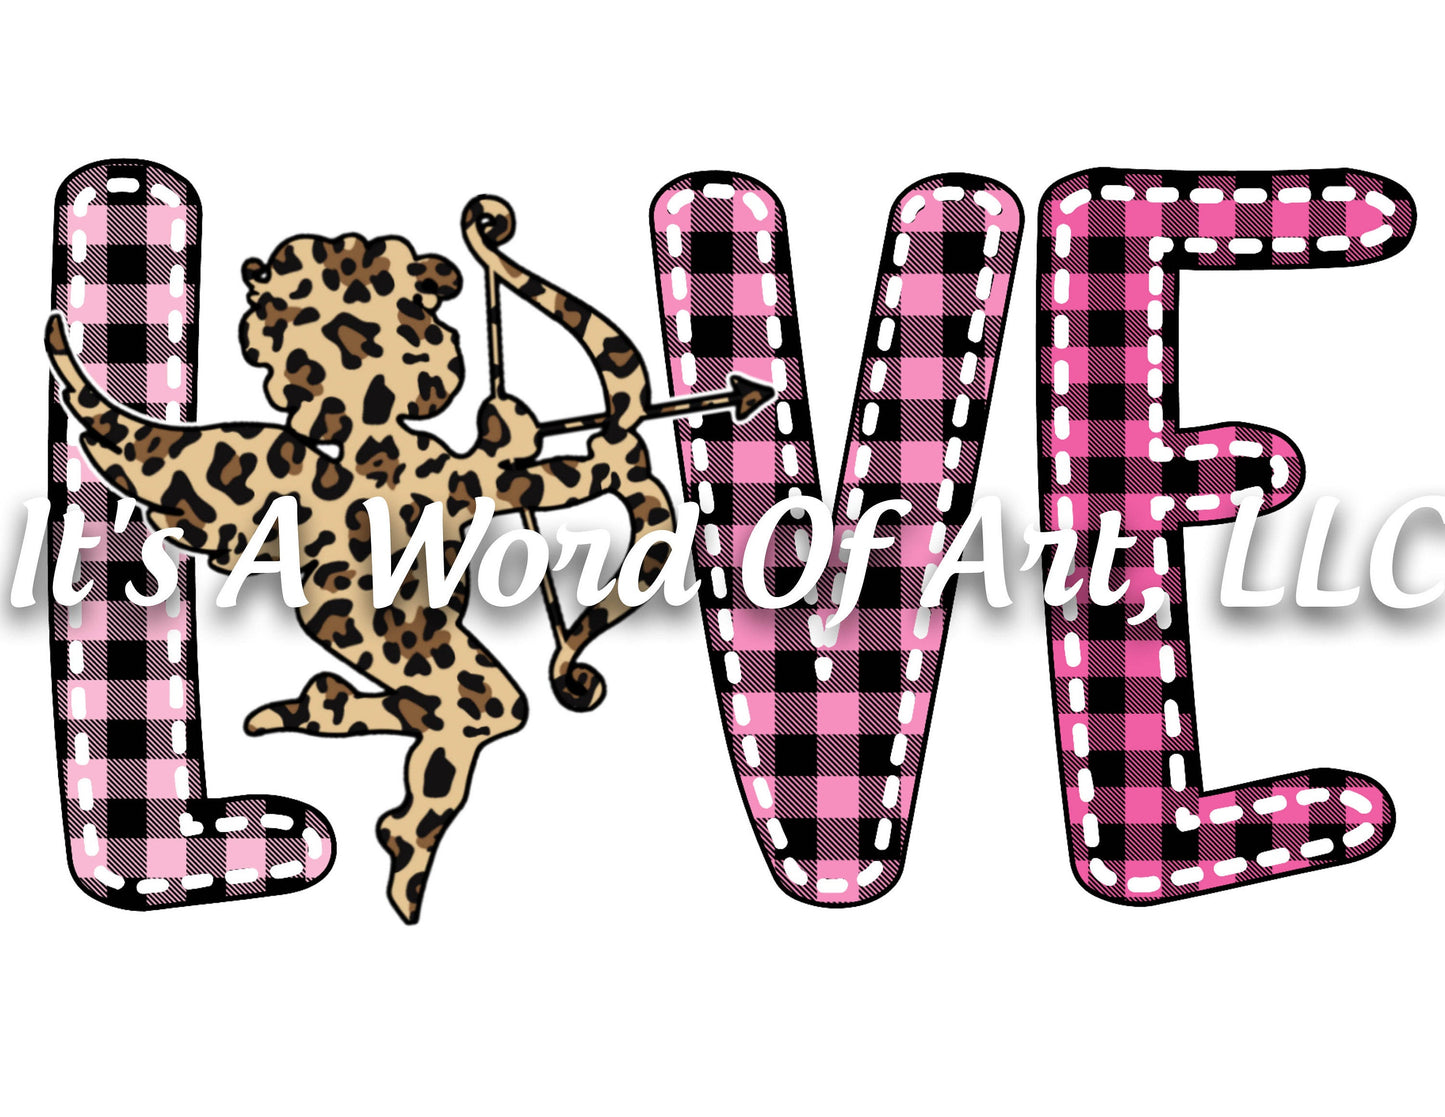 Valentines Day 5 - LOVE Cupid Buffalo Plaid Leopard - Sublimation Transfer Set/Ready To Press Sublimation Transfer/Sublimation Transfer